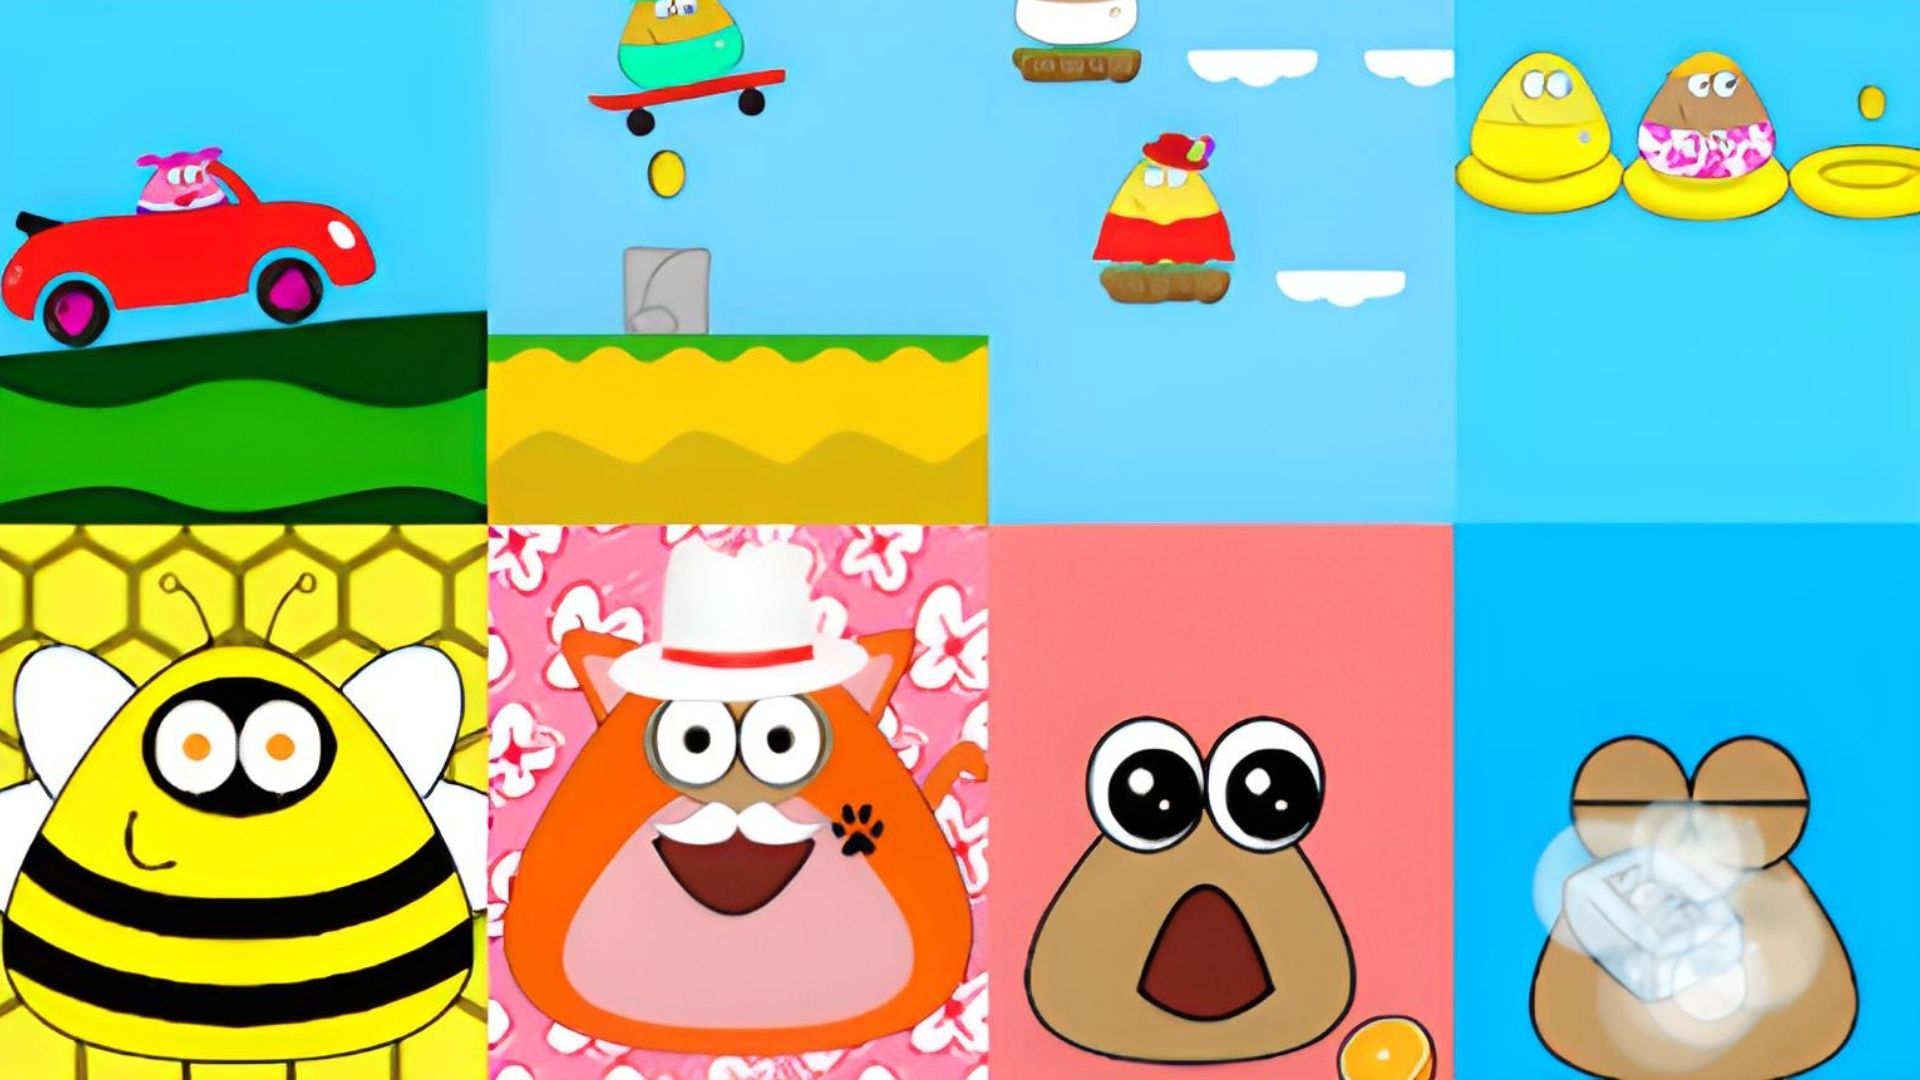 Pou::Appstore for Android